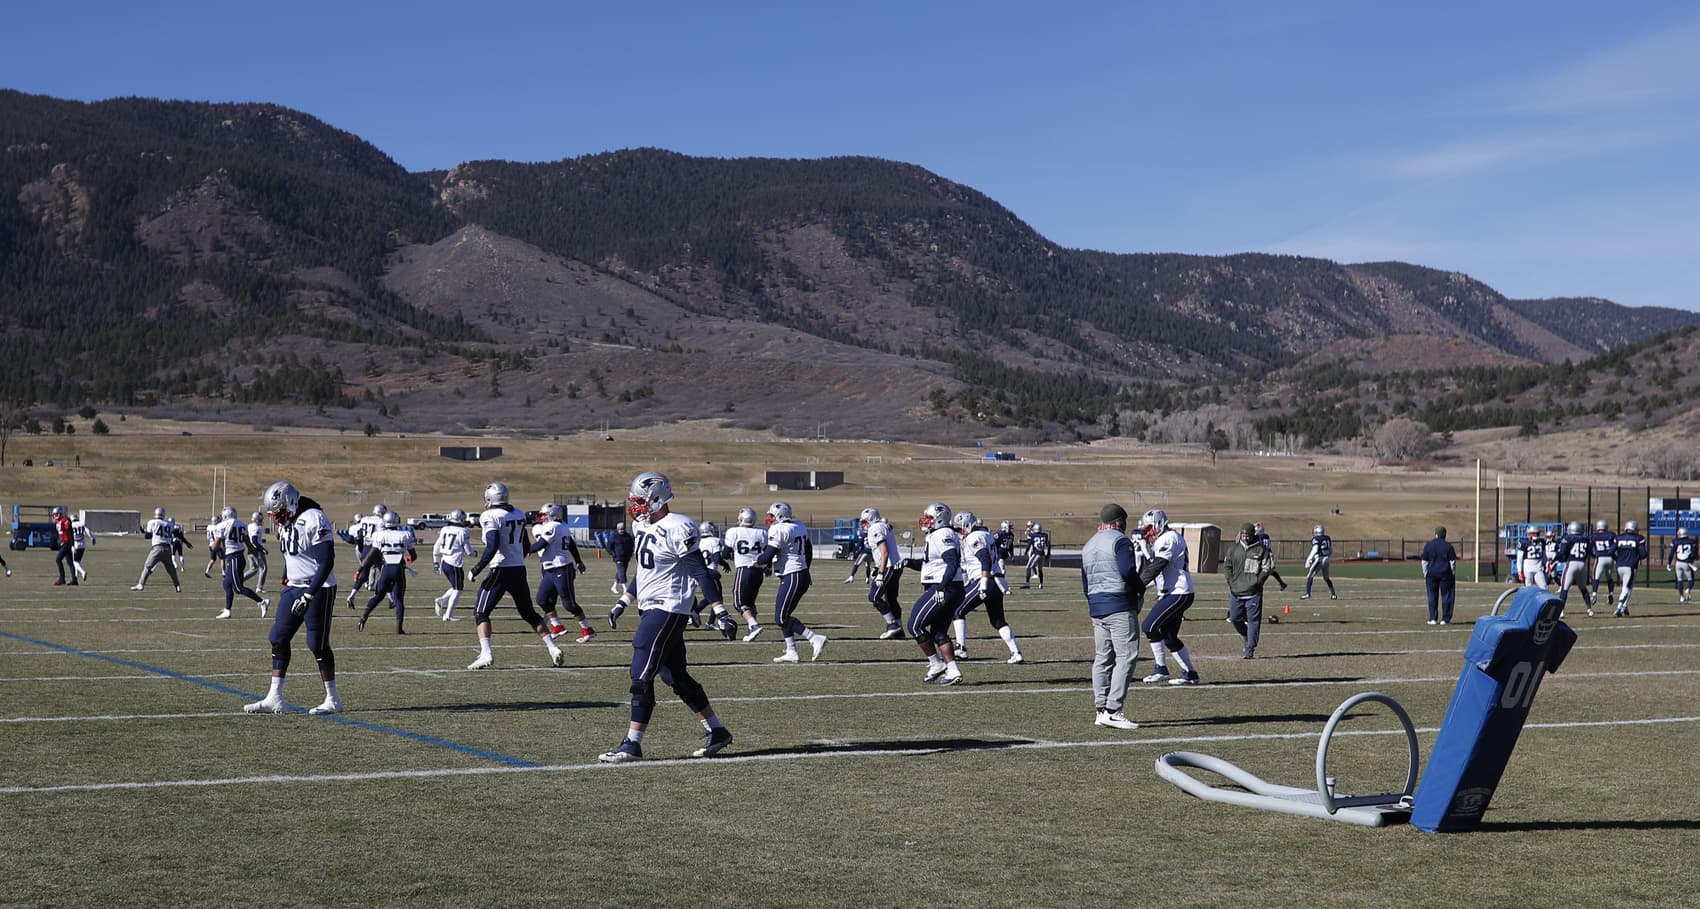 With the surrounding mountains in the background, the New England Patriots take part in drills at NFL football practice, Wednesday, Nov. 15, 2017, on the campus of the Air Force Academy in Air Force Academy, Colo. The Patriots are practicing at Air Force, which is located at an elevation of 7,200 feet, to prepare to face the Oakland Raiders during an NFL football game Sunday in Mexico City, which sits at an elevation of almost 7,400 feet above sea level. (AP Photo/David Zalubowski)